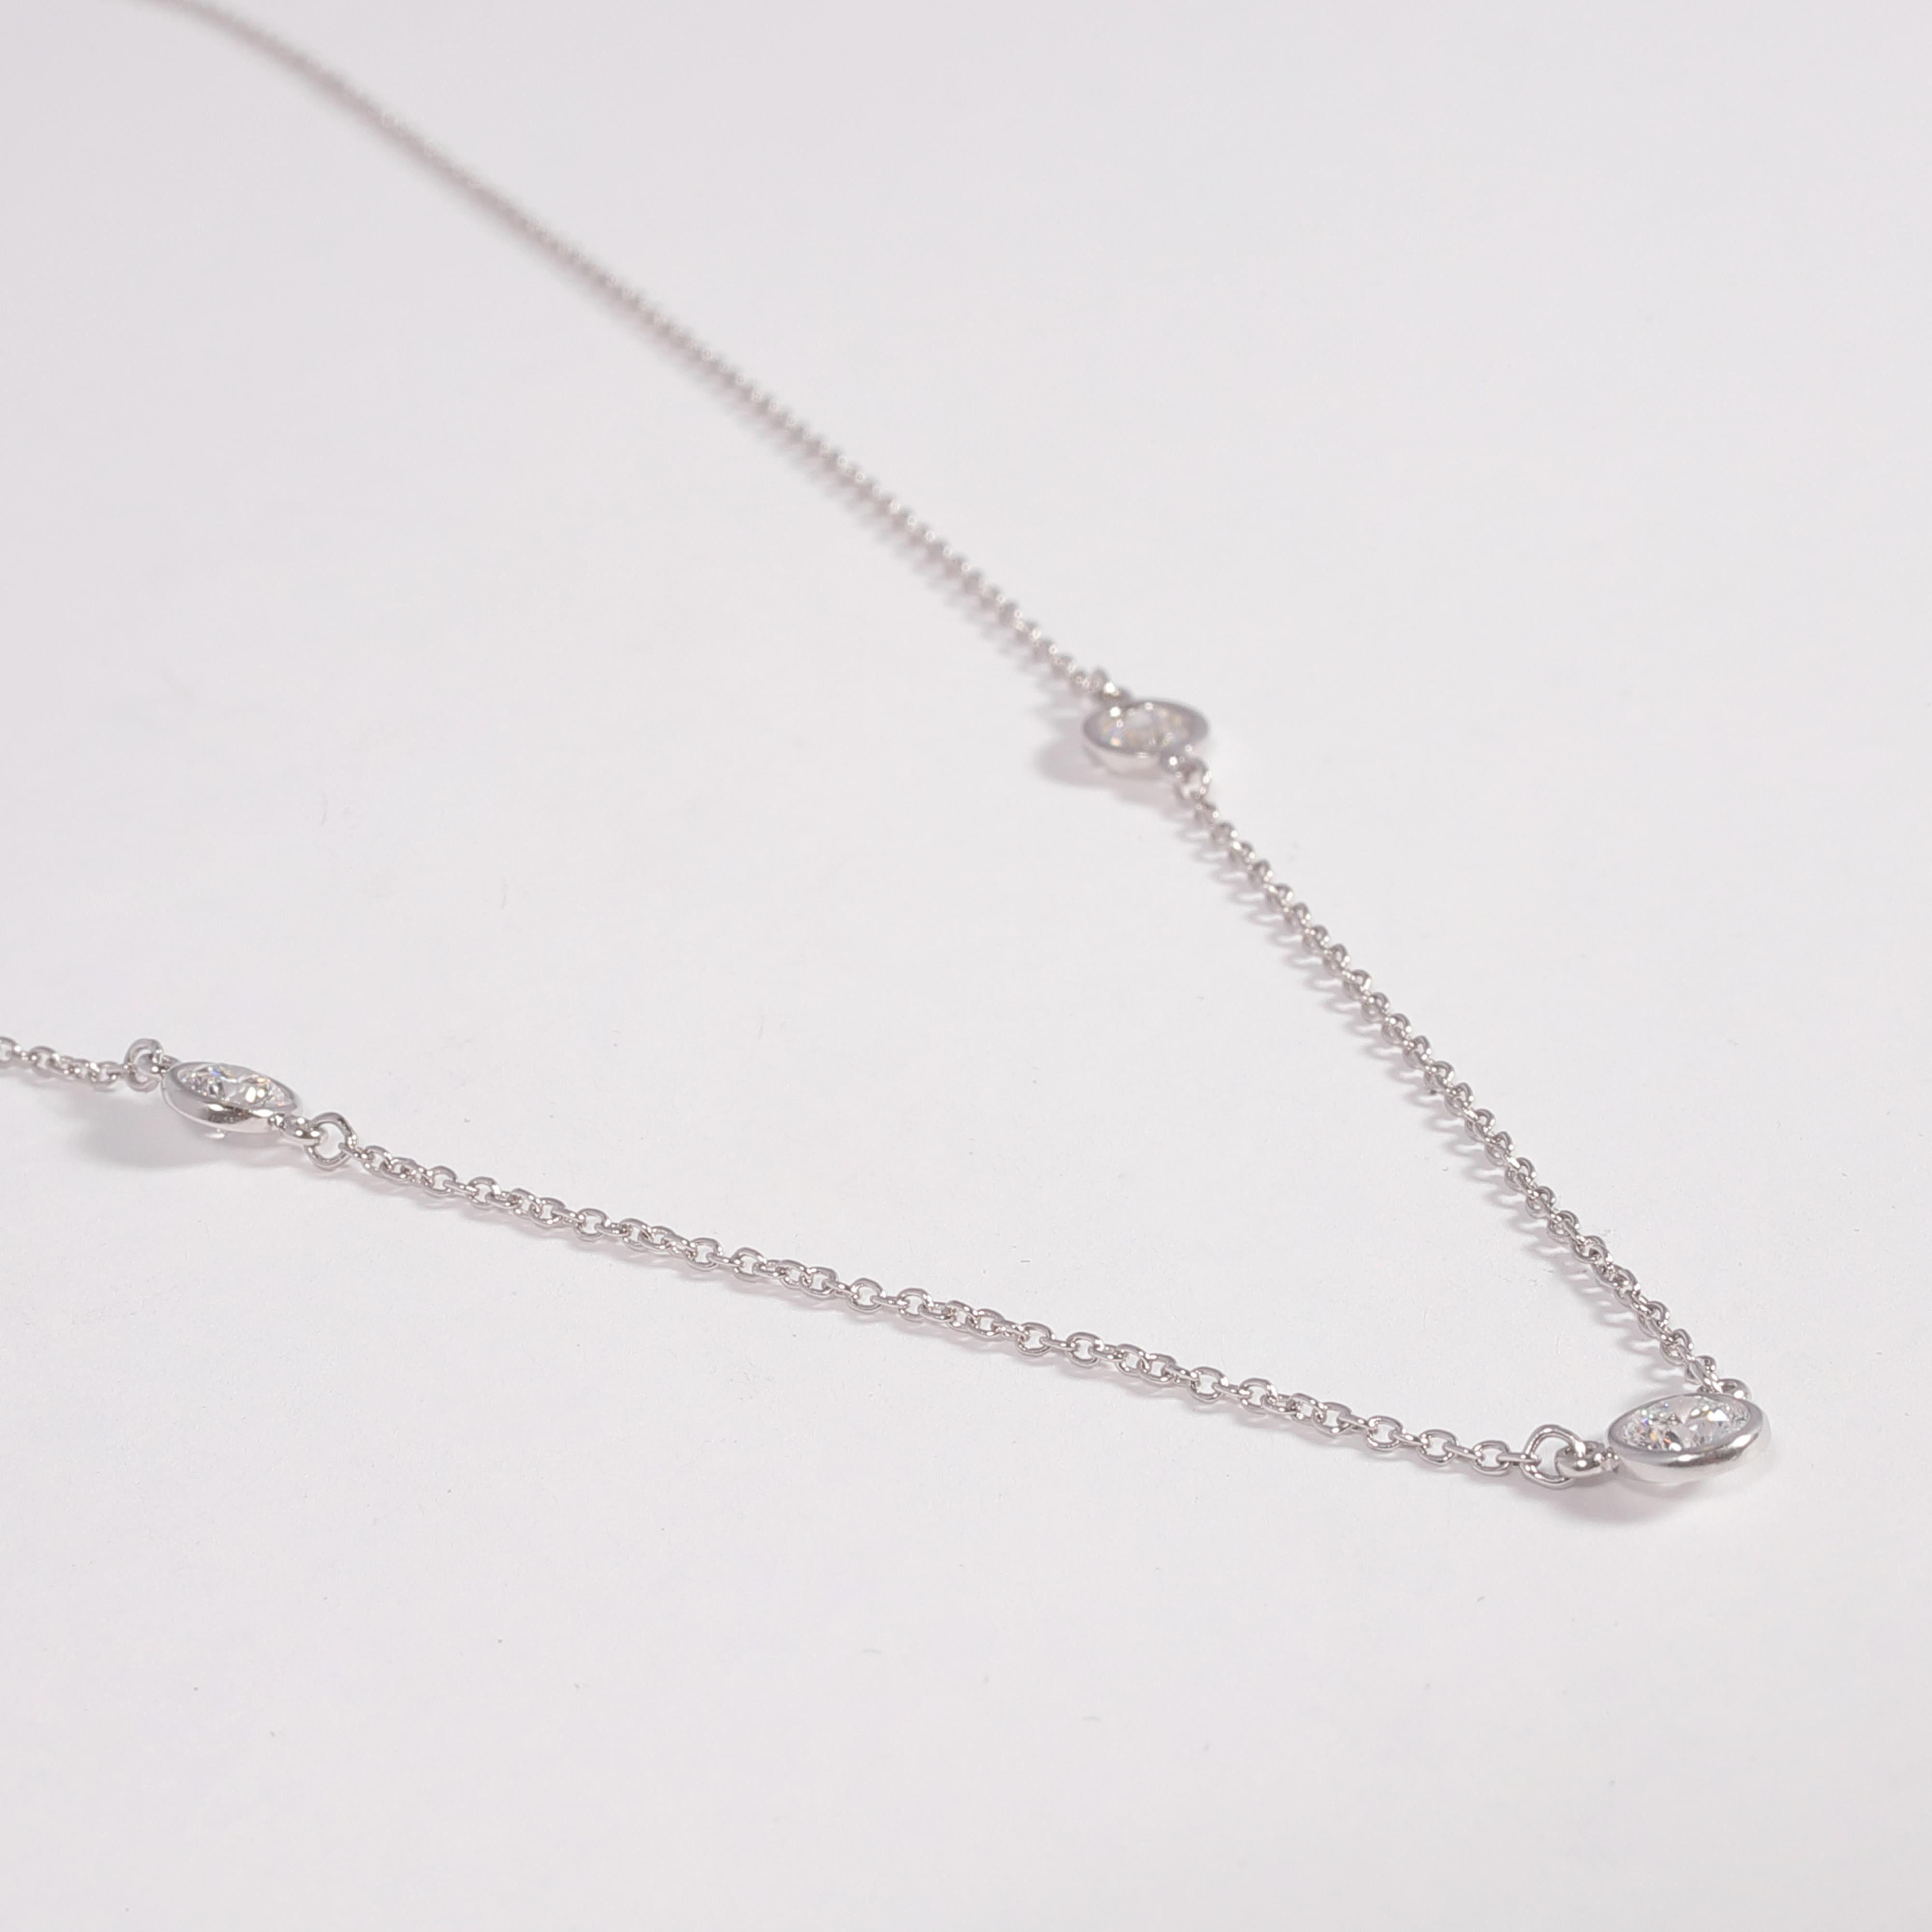 Women's or Men's Diamonds by the Yard Necklace by Elsa Peretti for Tiffany & Co.